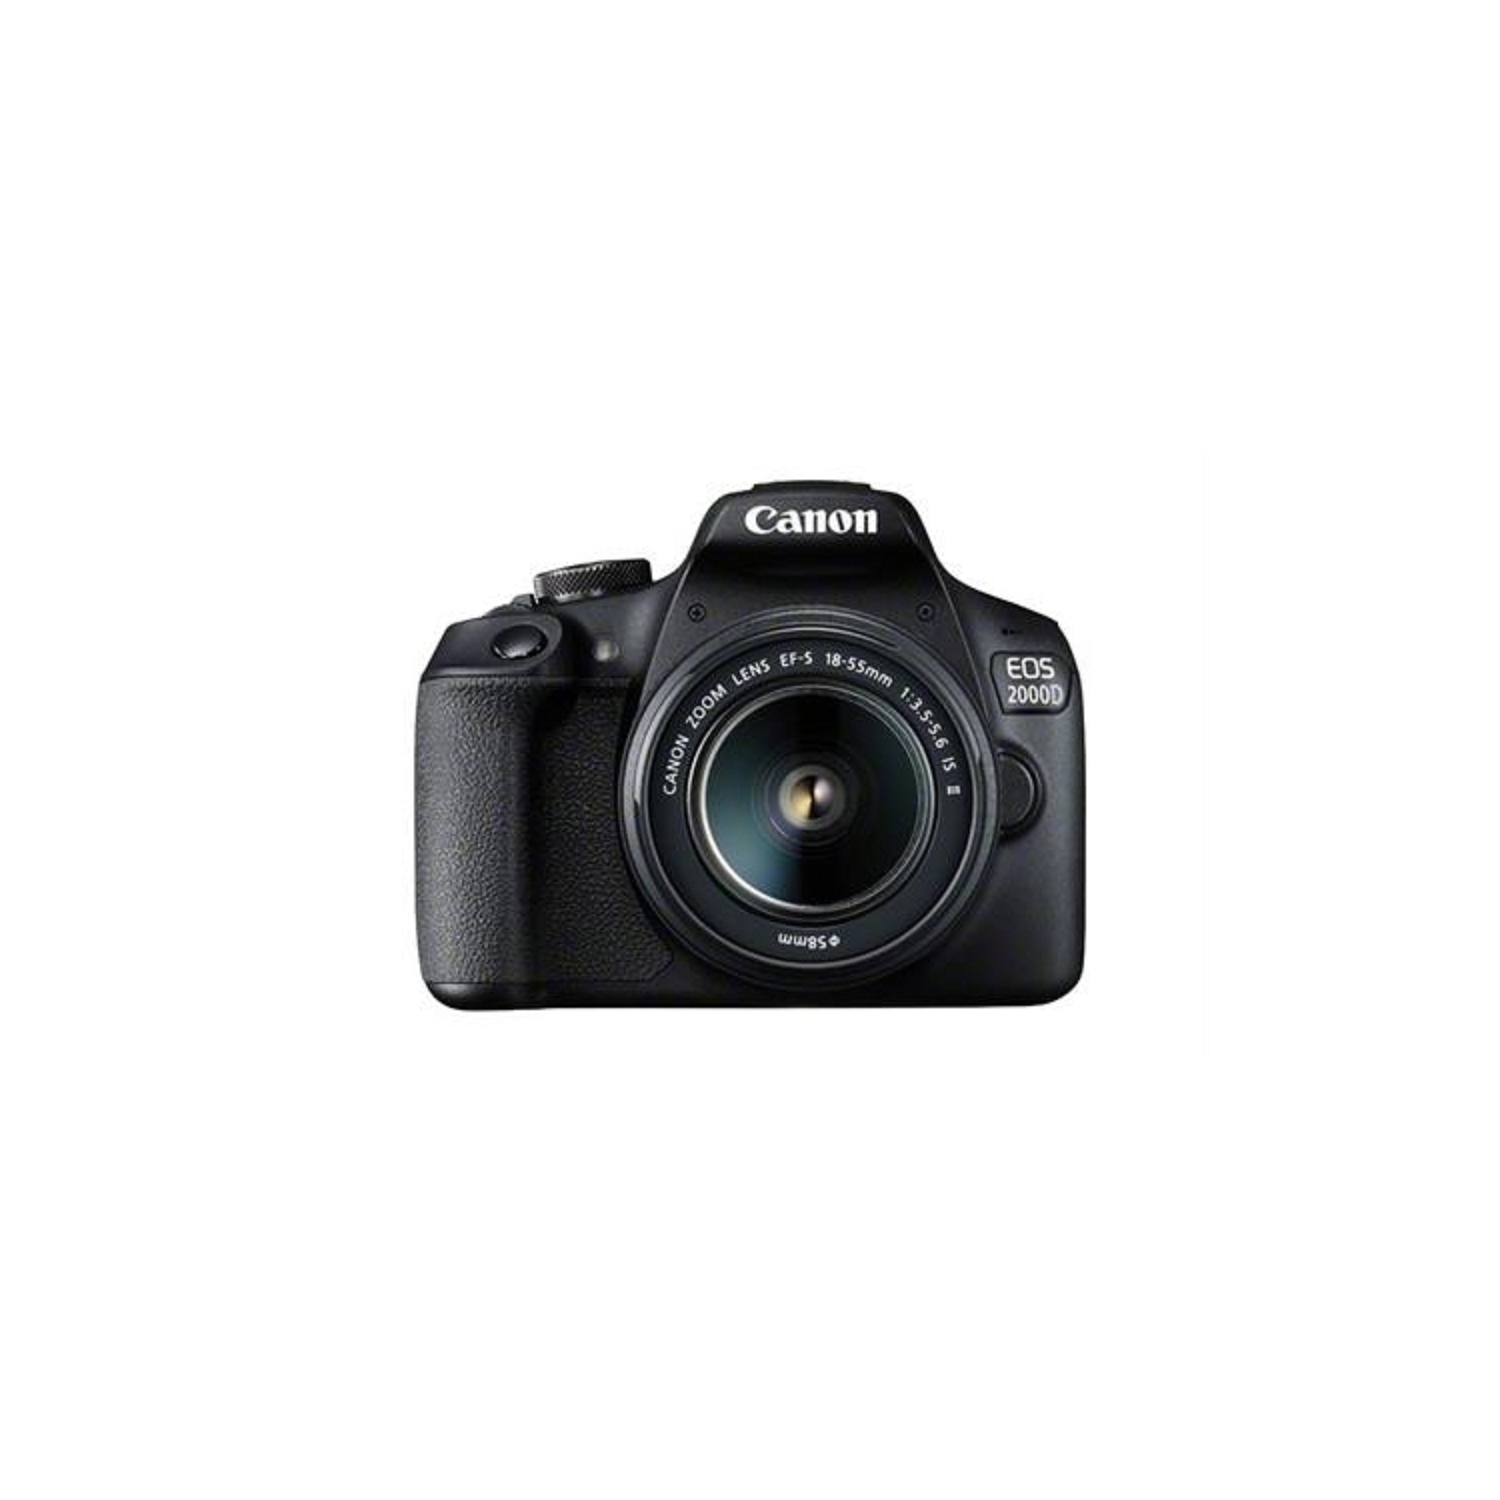 Canon EOS 2000D / Rebel T7 with 18-55mm IS II Lens